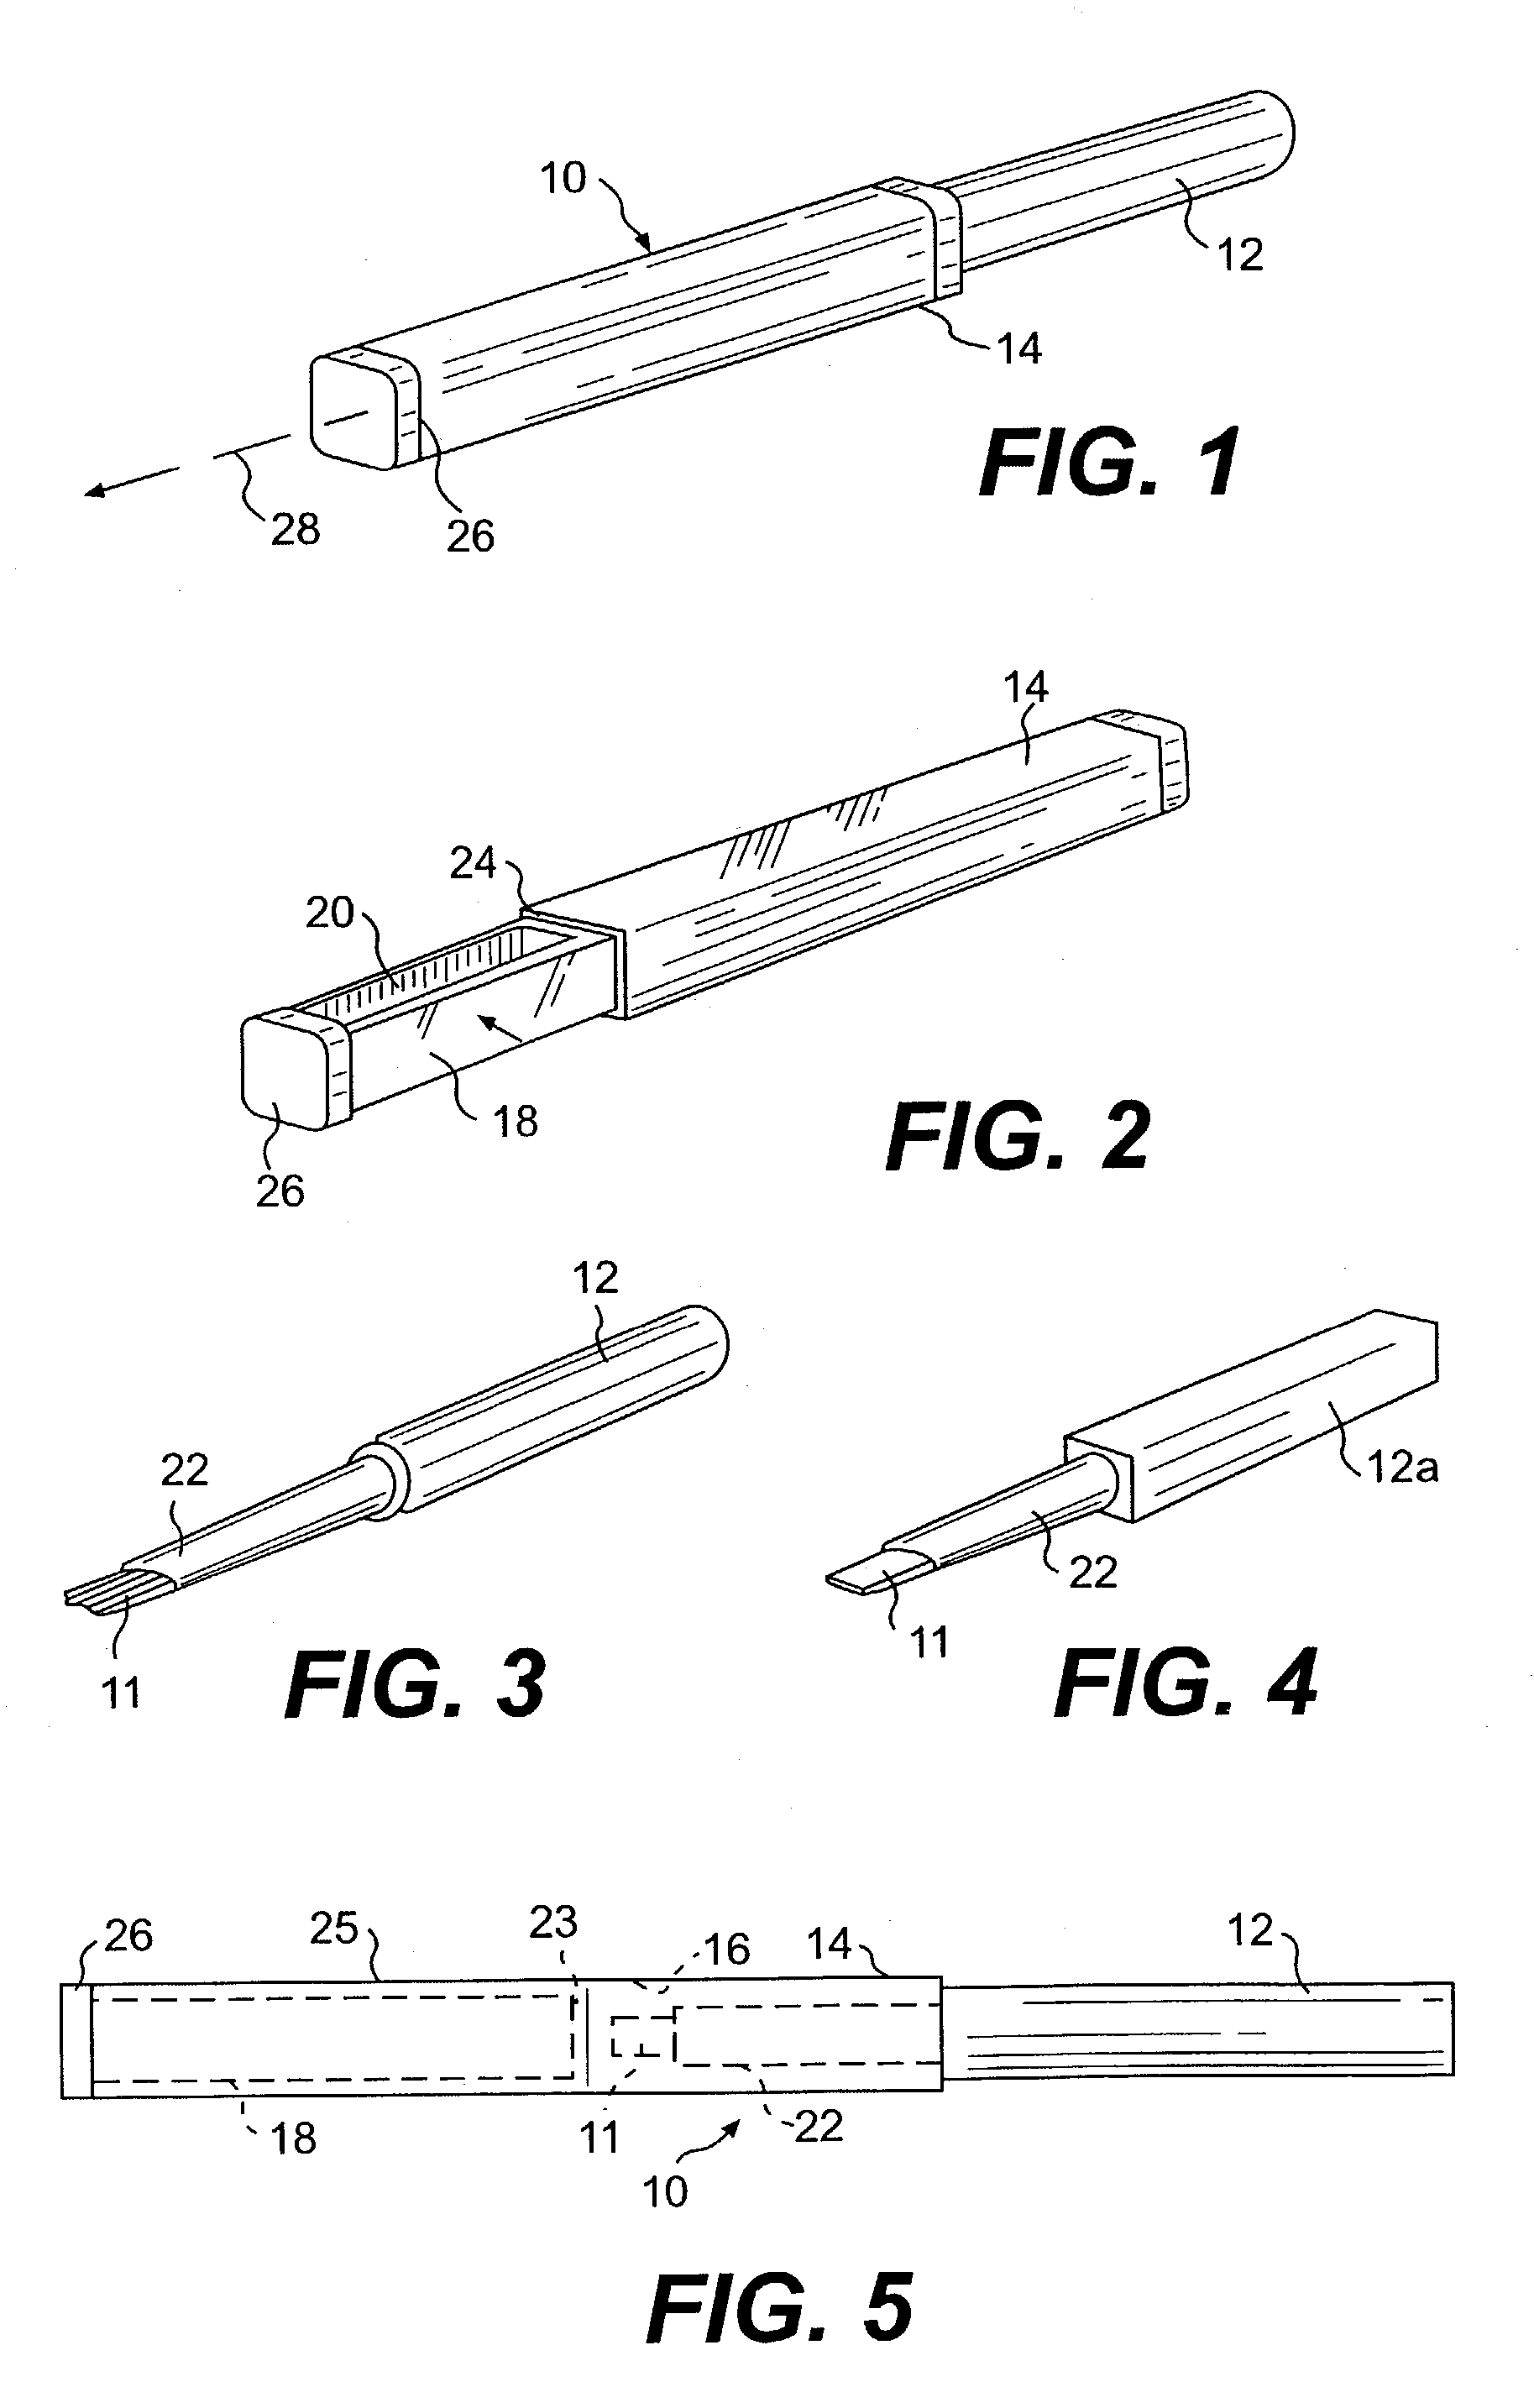 Material dispenser with applicator